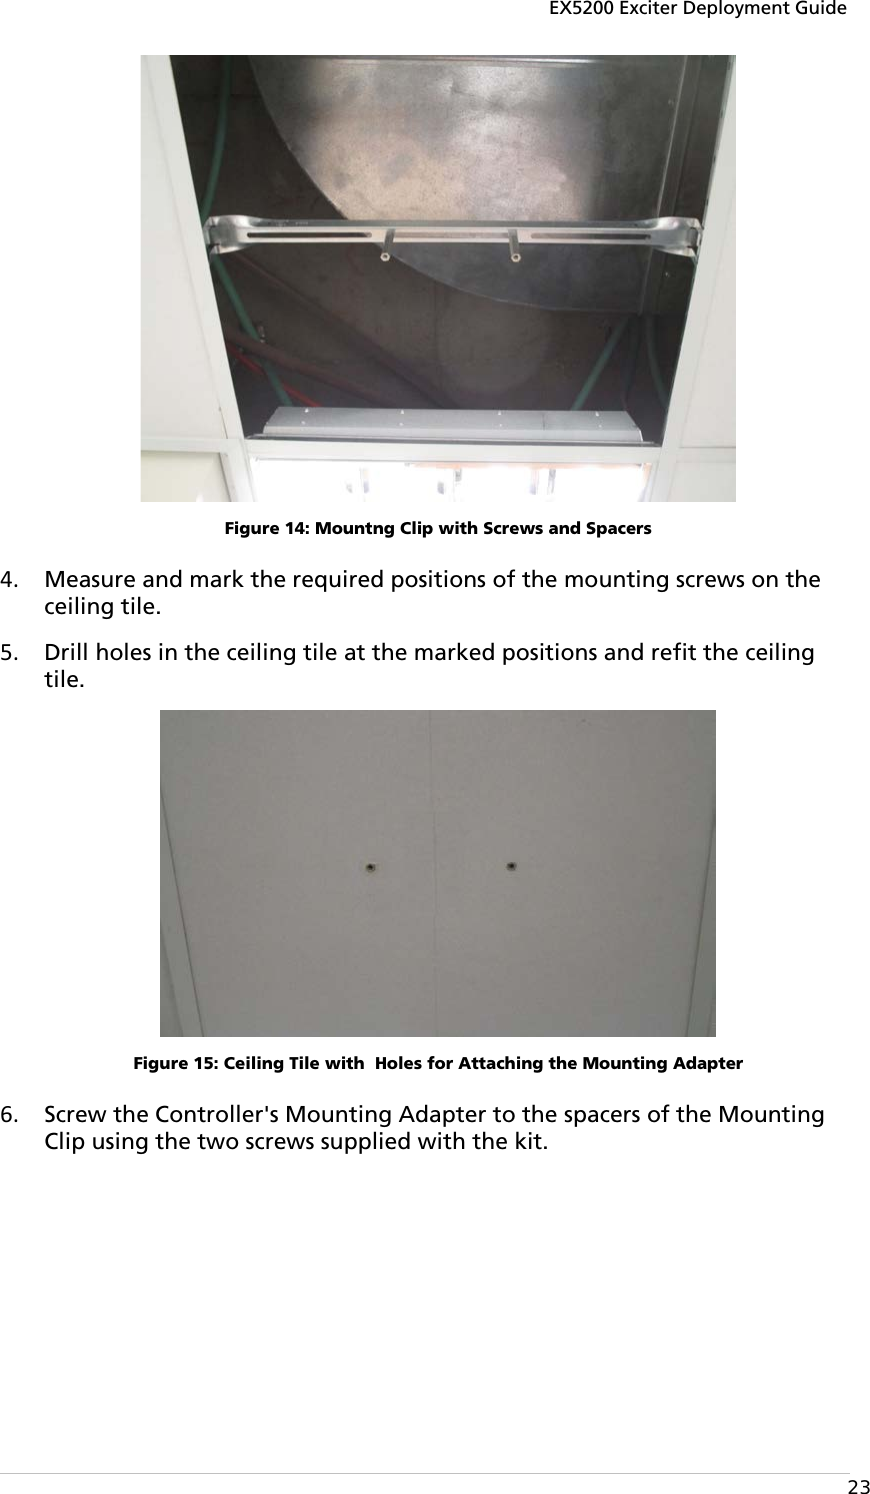 EX5200 Exciter Deployment Guide  23  Figure 14: Mountng Clip with Screws and Spacers 4. Measure and mark the required positions of the mounting screws on the ceiling tile.  5. Drill holes in the ceiling tile at the marked positions and refit the ceiling tile.  Figure 15: Ceiling Tile with  Holes for Attaching the Mounting Adapter 6. Screw the Controller&apos;s Mounting Adapter to the spacers of the Mounting Clip using the two screws supplied with the kit. 